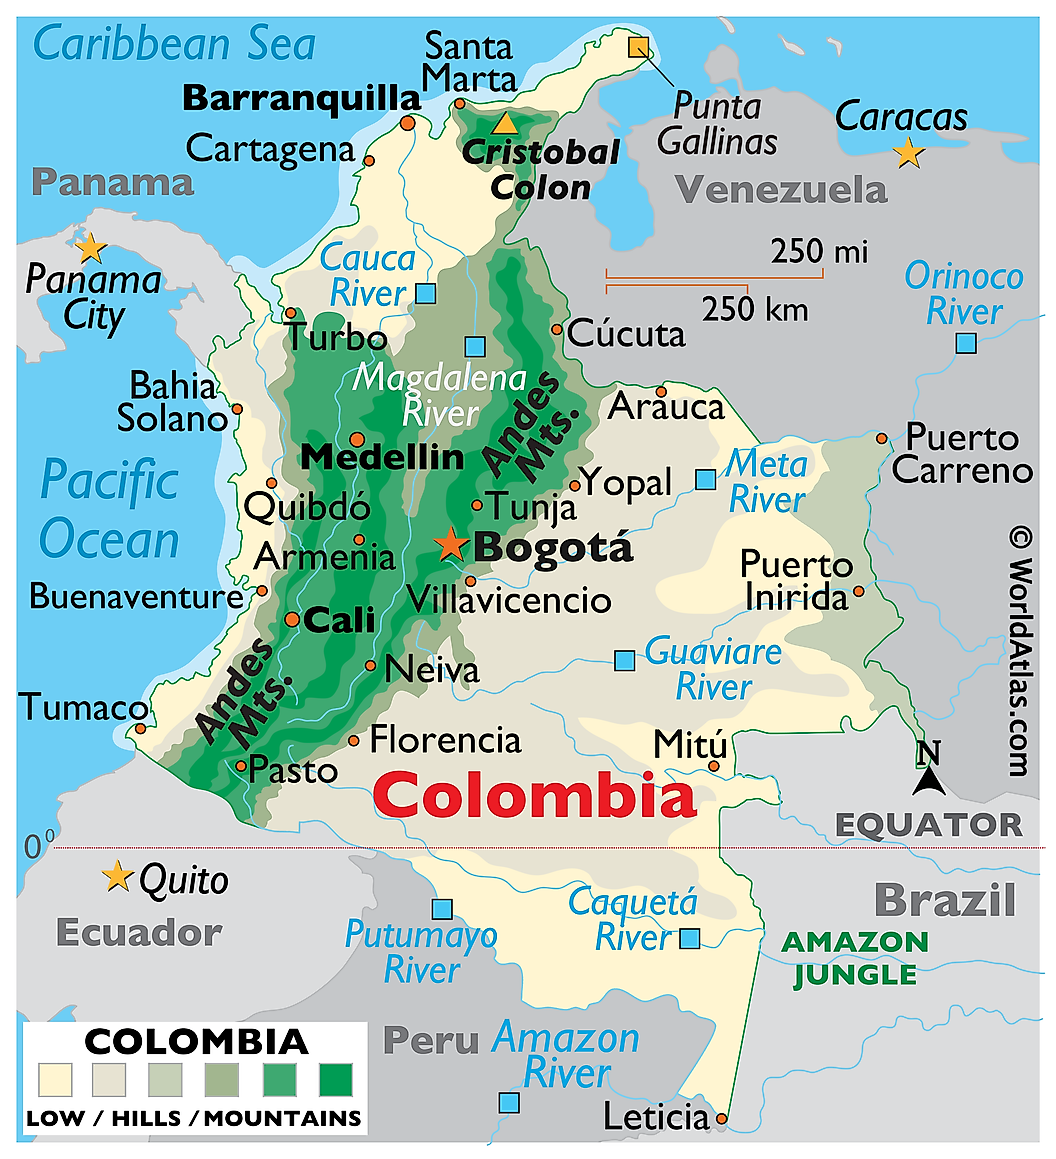 A map of Colombia, showing the different regions of the country